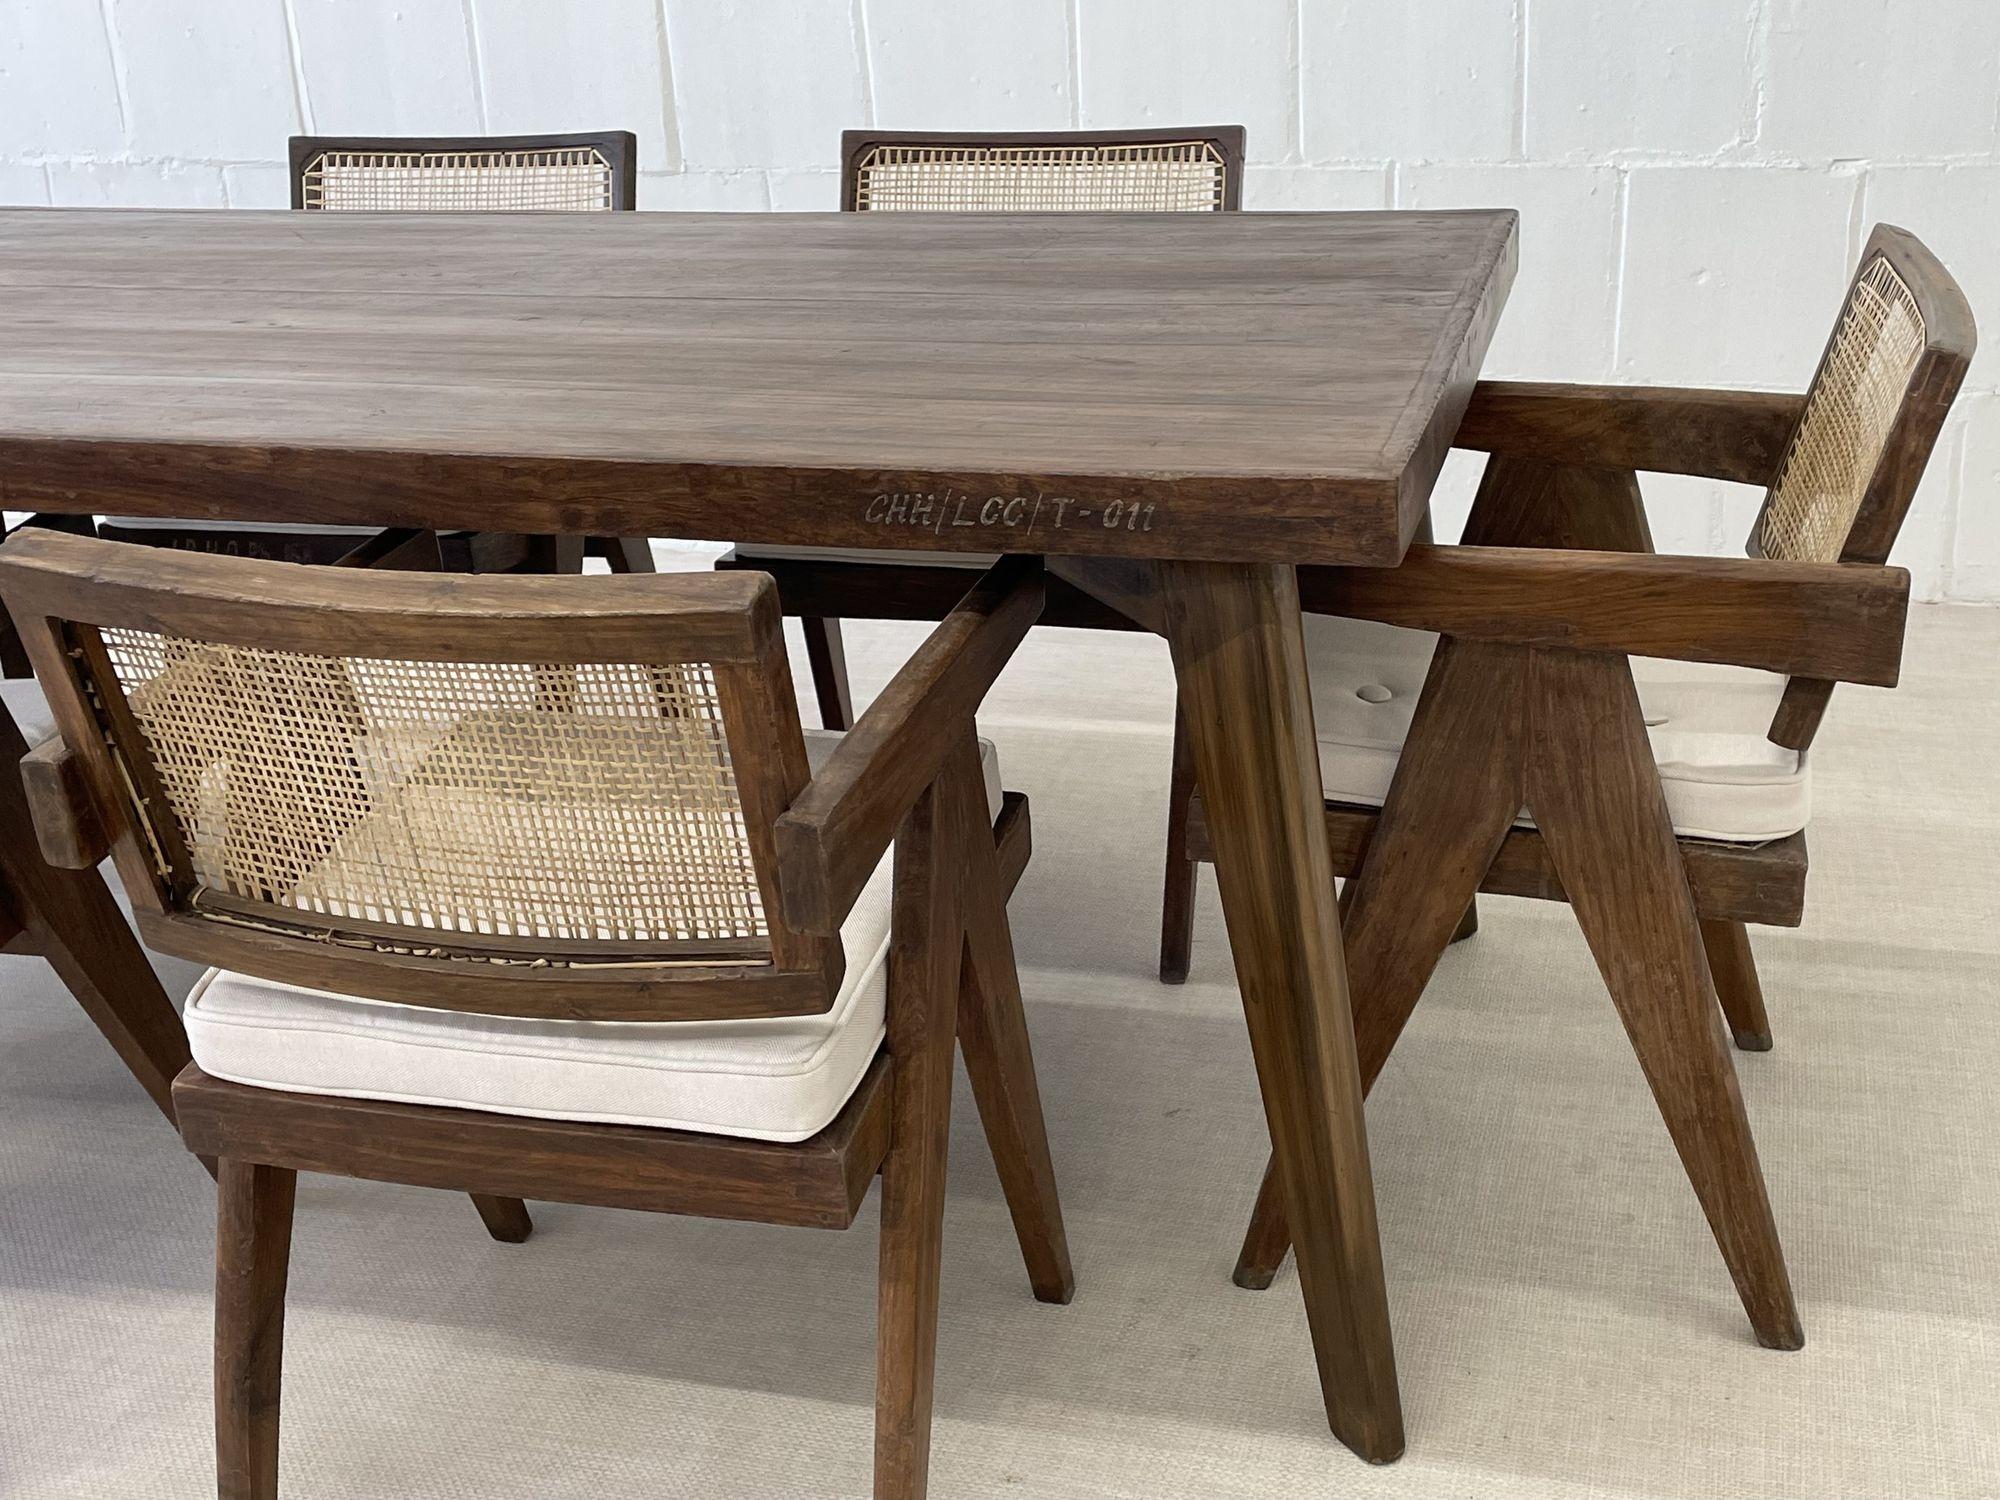 Indian Pierre Jeanneret, French-Mid Century Modern, Dining Table, Teak, India, 1960s For Sale